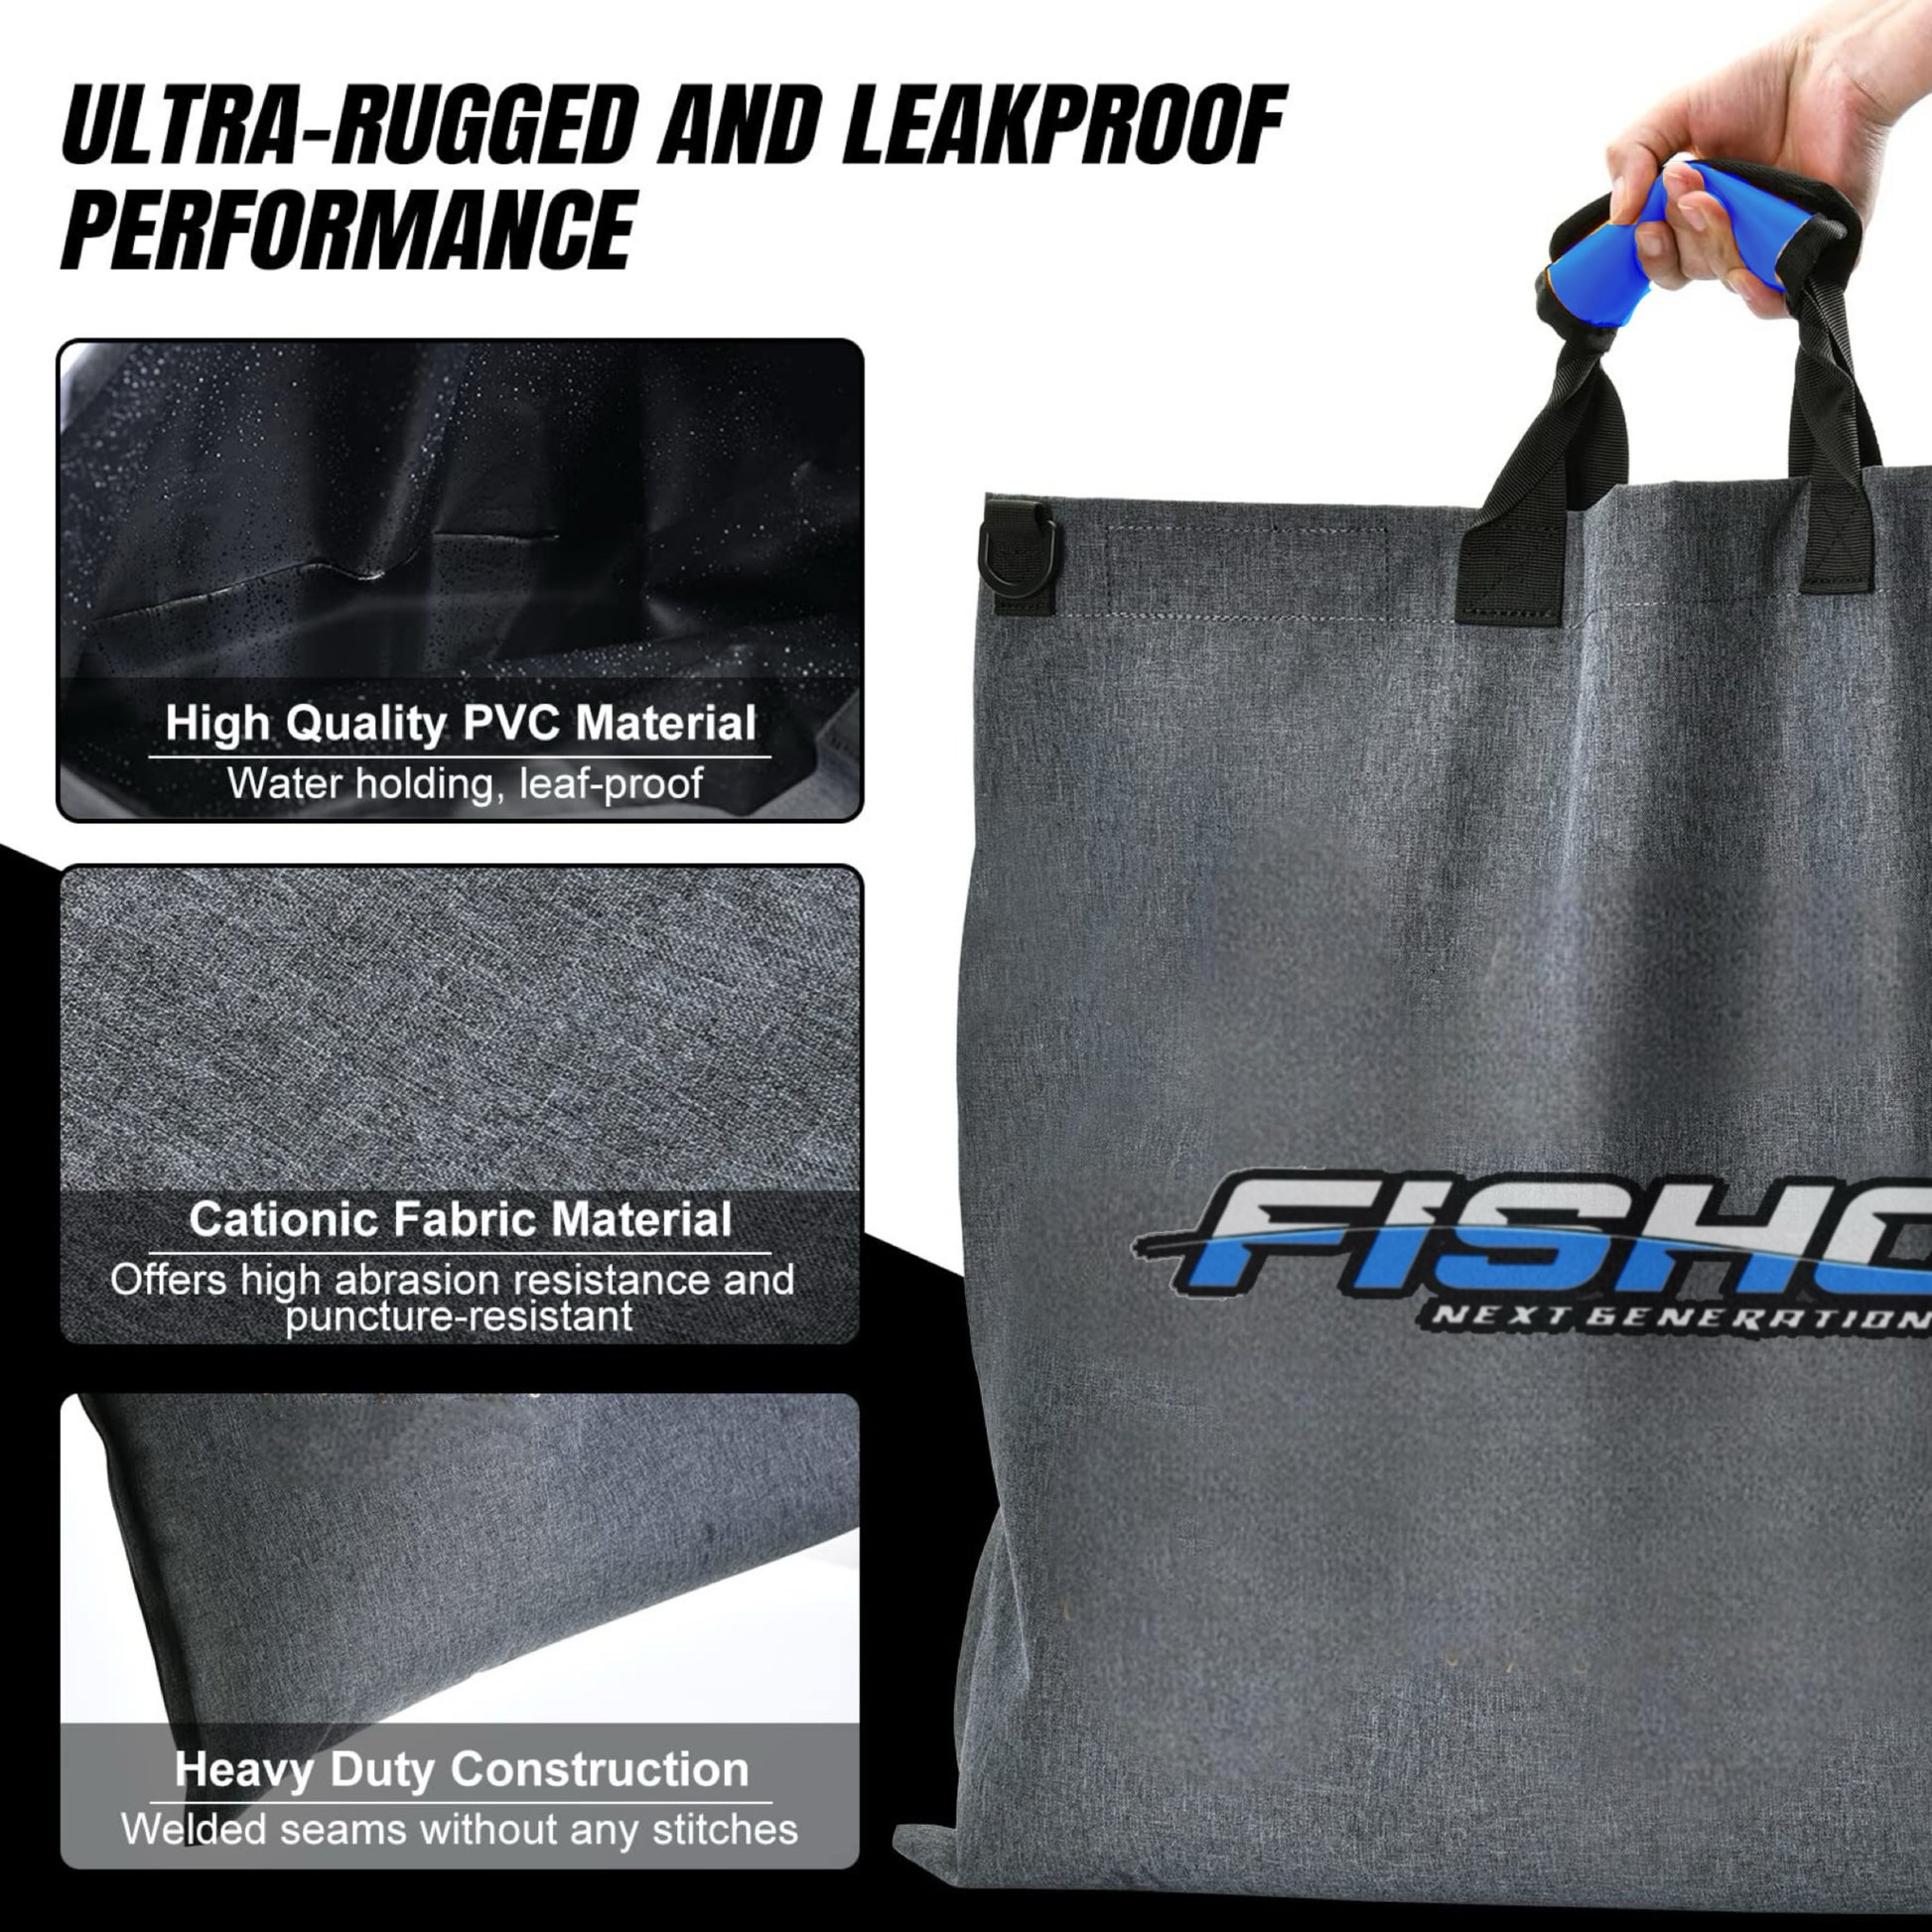 Angler's Best Leak Proof and Puncture Resistant Tournament Fish Bag